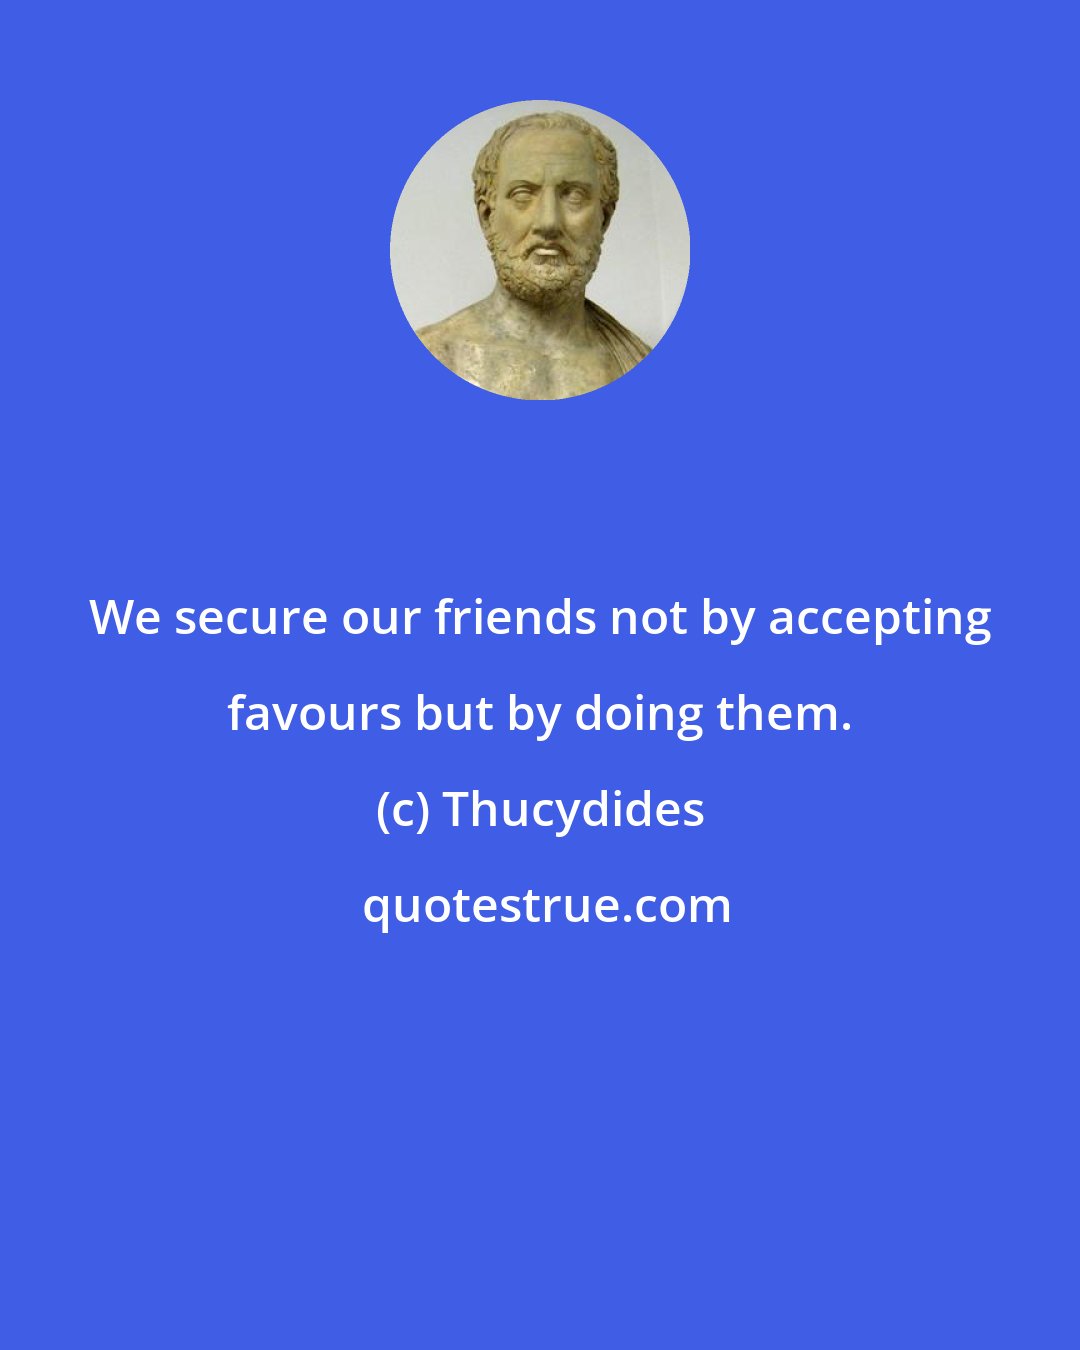 Thucydides: We secure our friends not by accepting favours but by doing them.